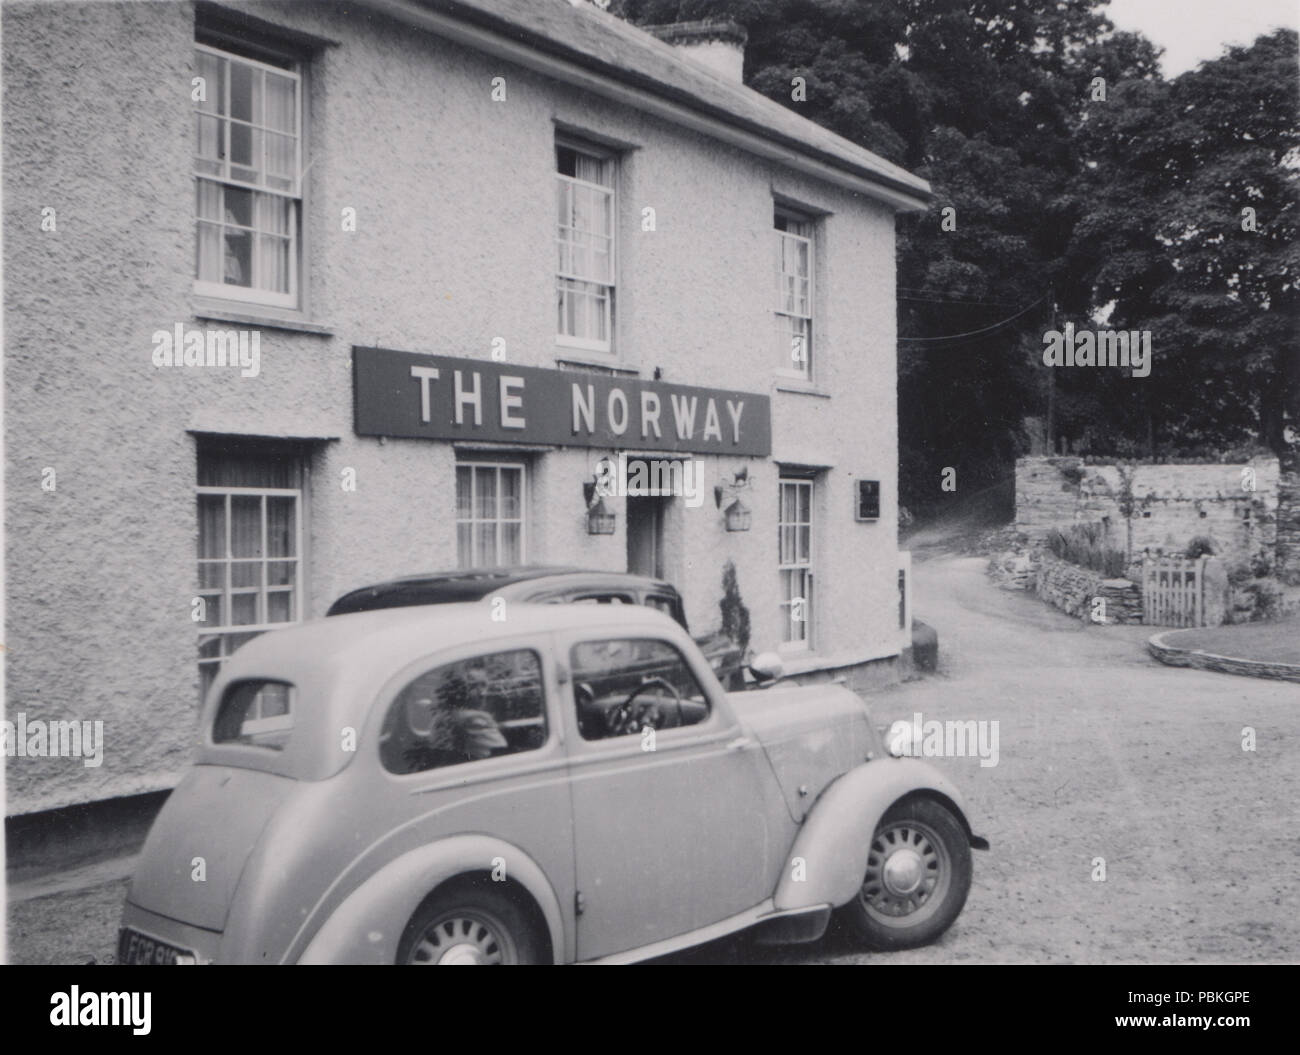 The norway inn hi-res stock photography and images - Alamy